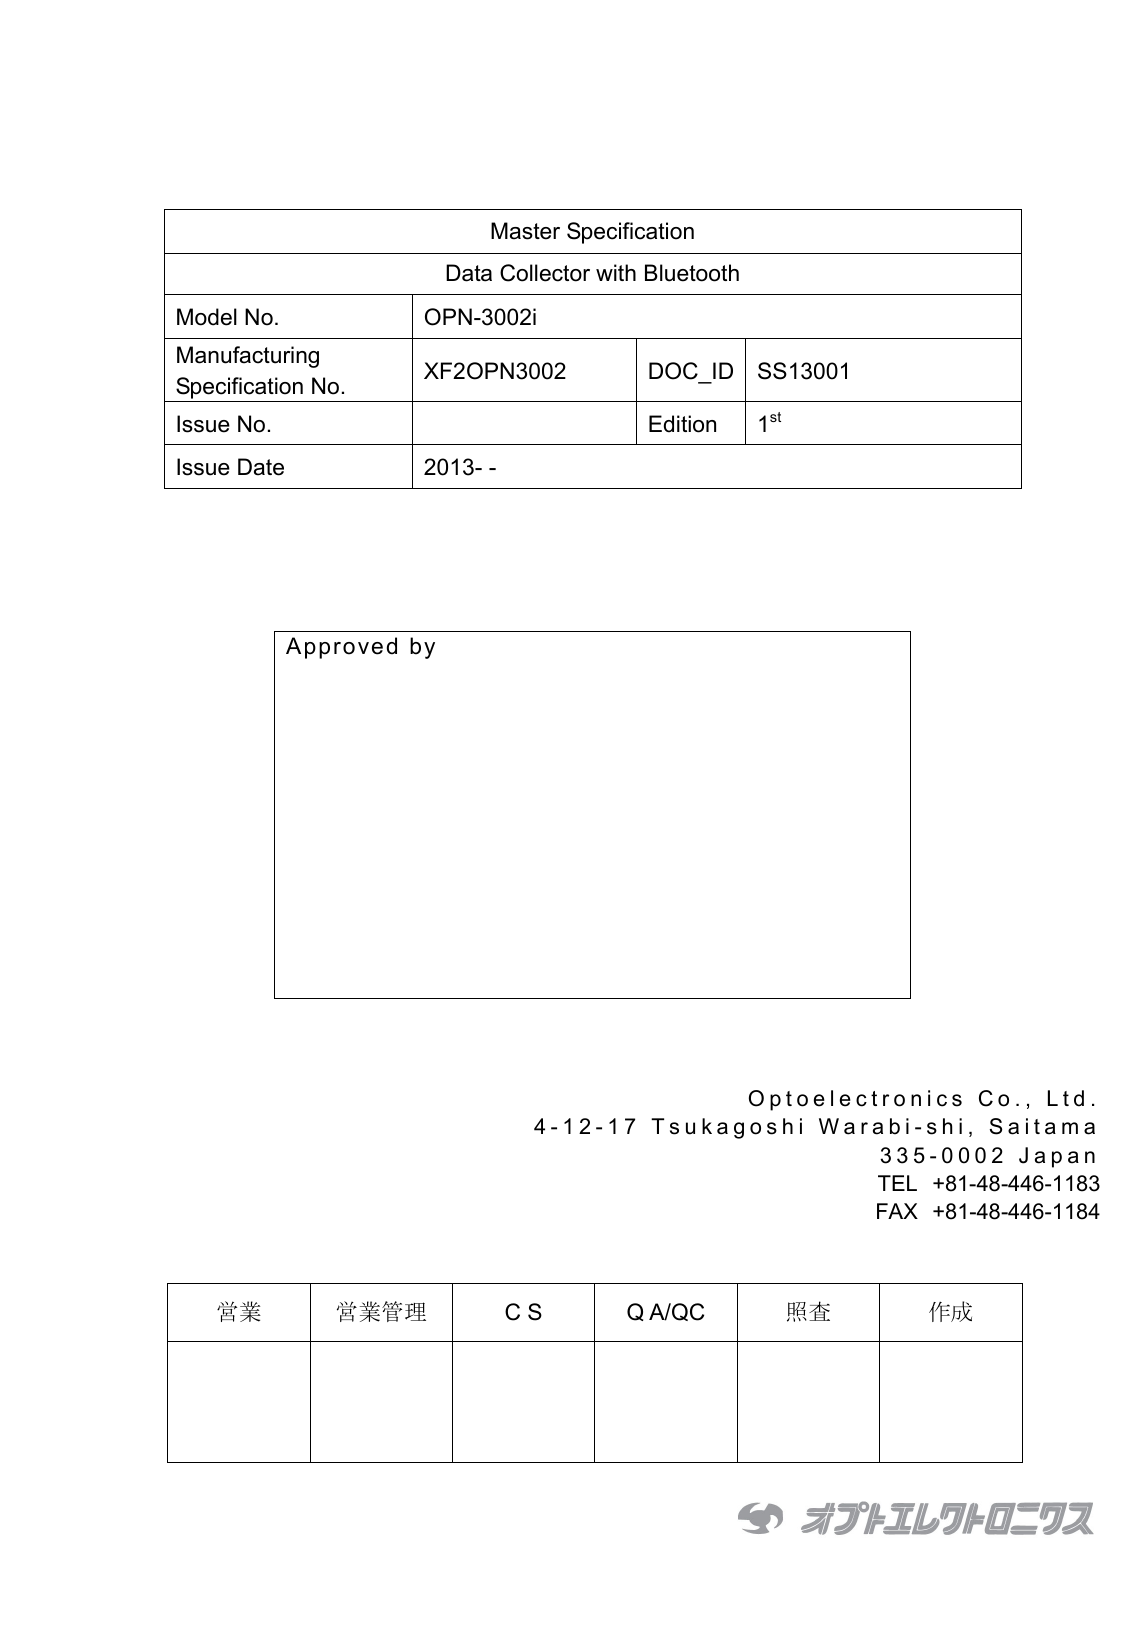       Master Specification Data Collector with Bluetooth Model No.  OPN-3002i Manufacturing Specification No.  XF2OPN3002 DOC_ID SS13001 Issue No.    Edition  1st Issue Date  2013- -        Approved by     Optoelectronics Co., Ltd. 4-12-17 Tsukagoshi Warabi-shi, Saitama 335-0002 Japan TEL +81-48-446-1183 FAX +81-48-446-1184   営業 営業管理 C S  Q A/QC 照査 作成        